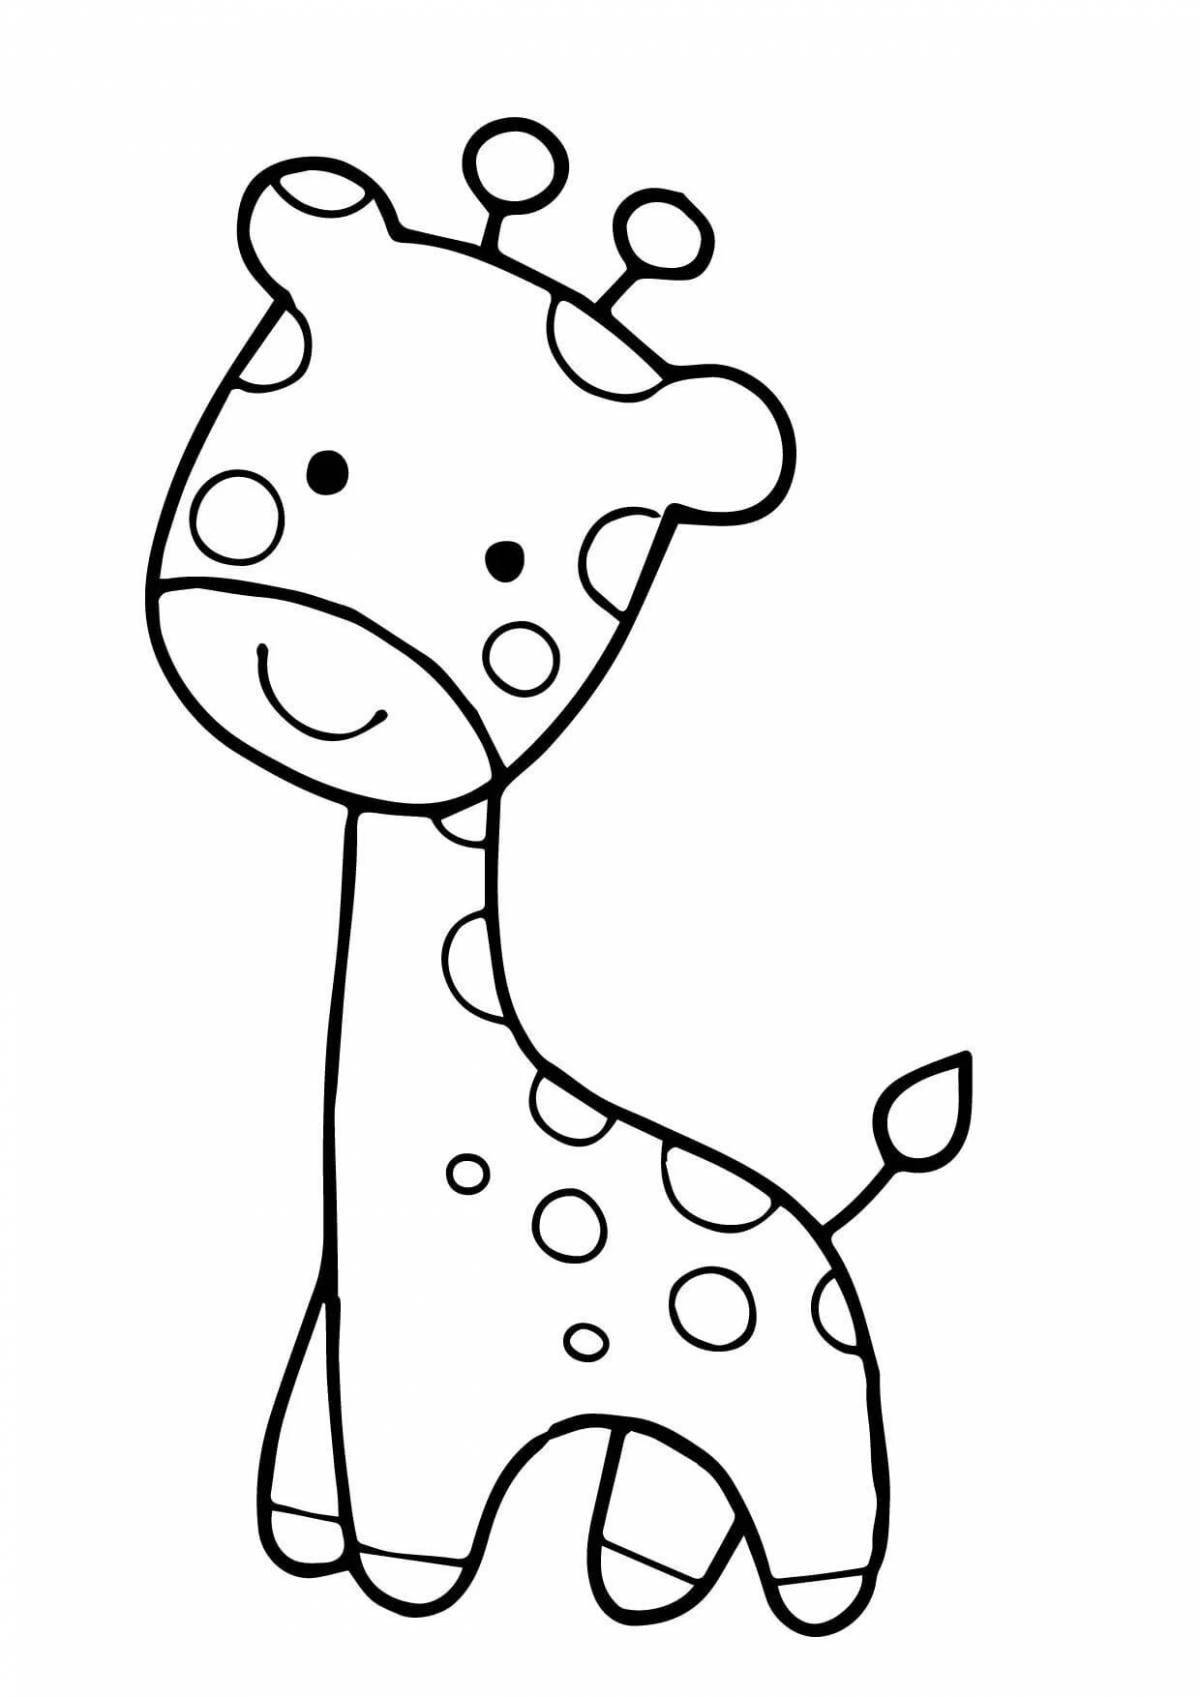 Animated light animal coloring pages